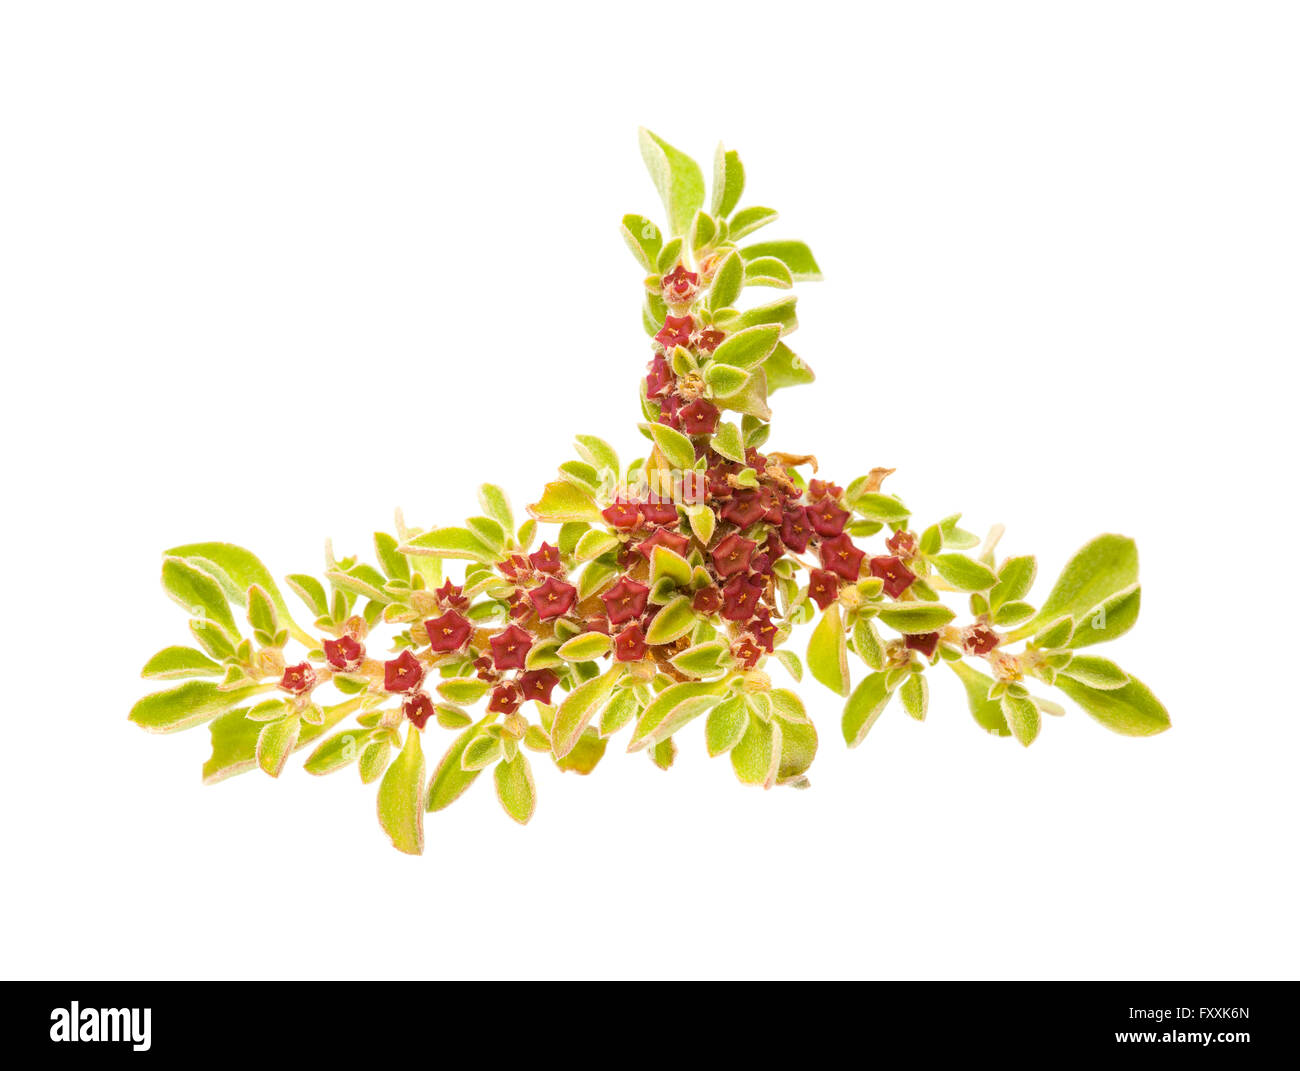 Flora of Gran Canaria - Aizoon canariense, Canarian iceplant, entire small plant isolated on white Stock Photo